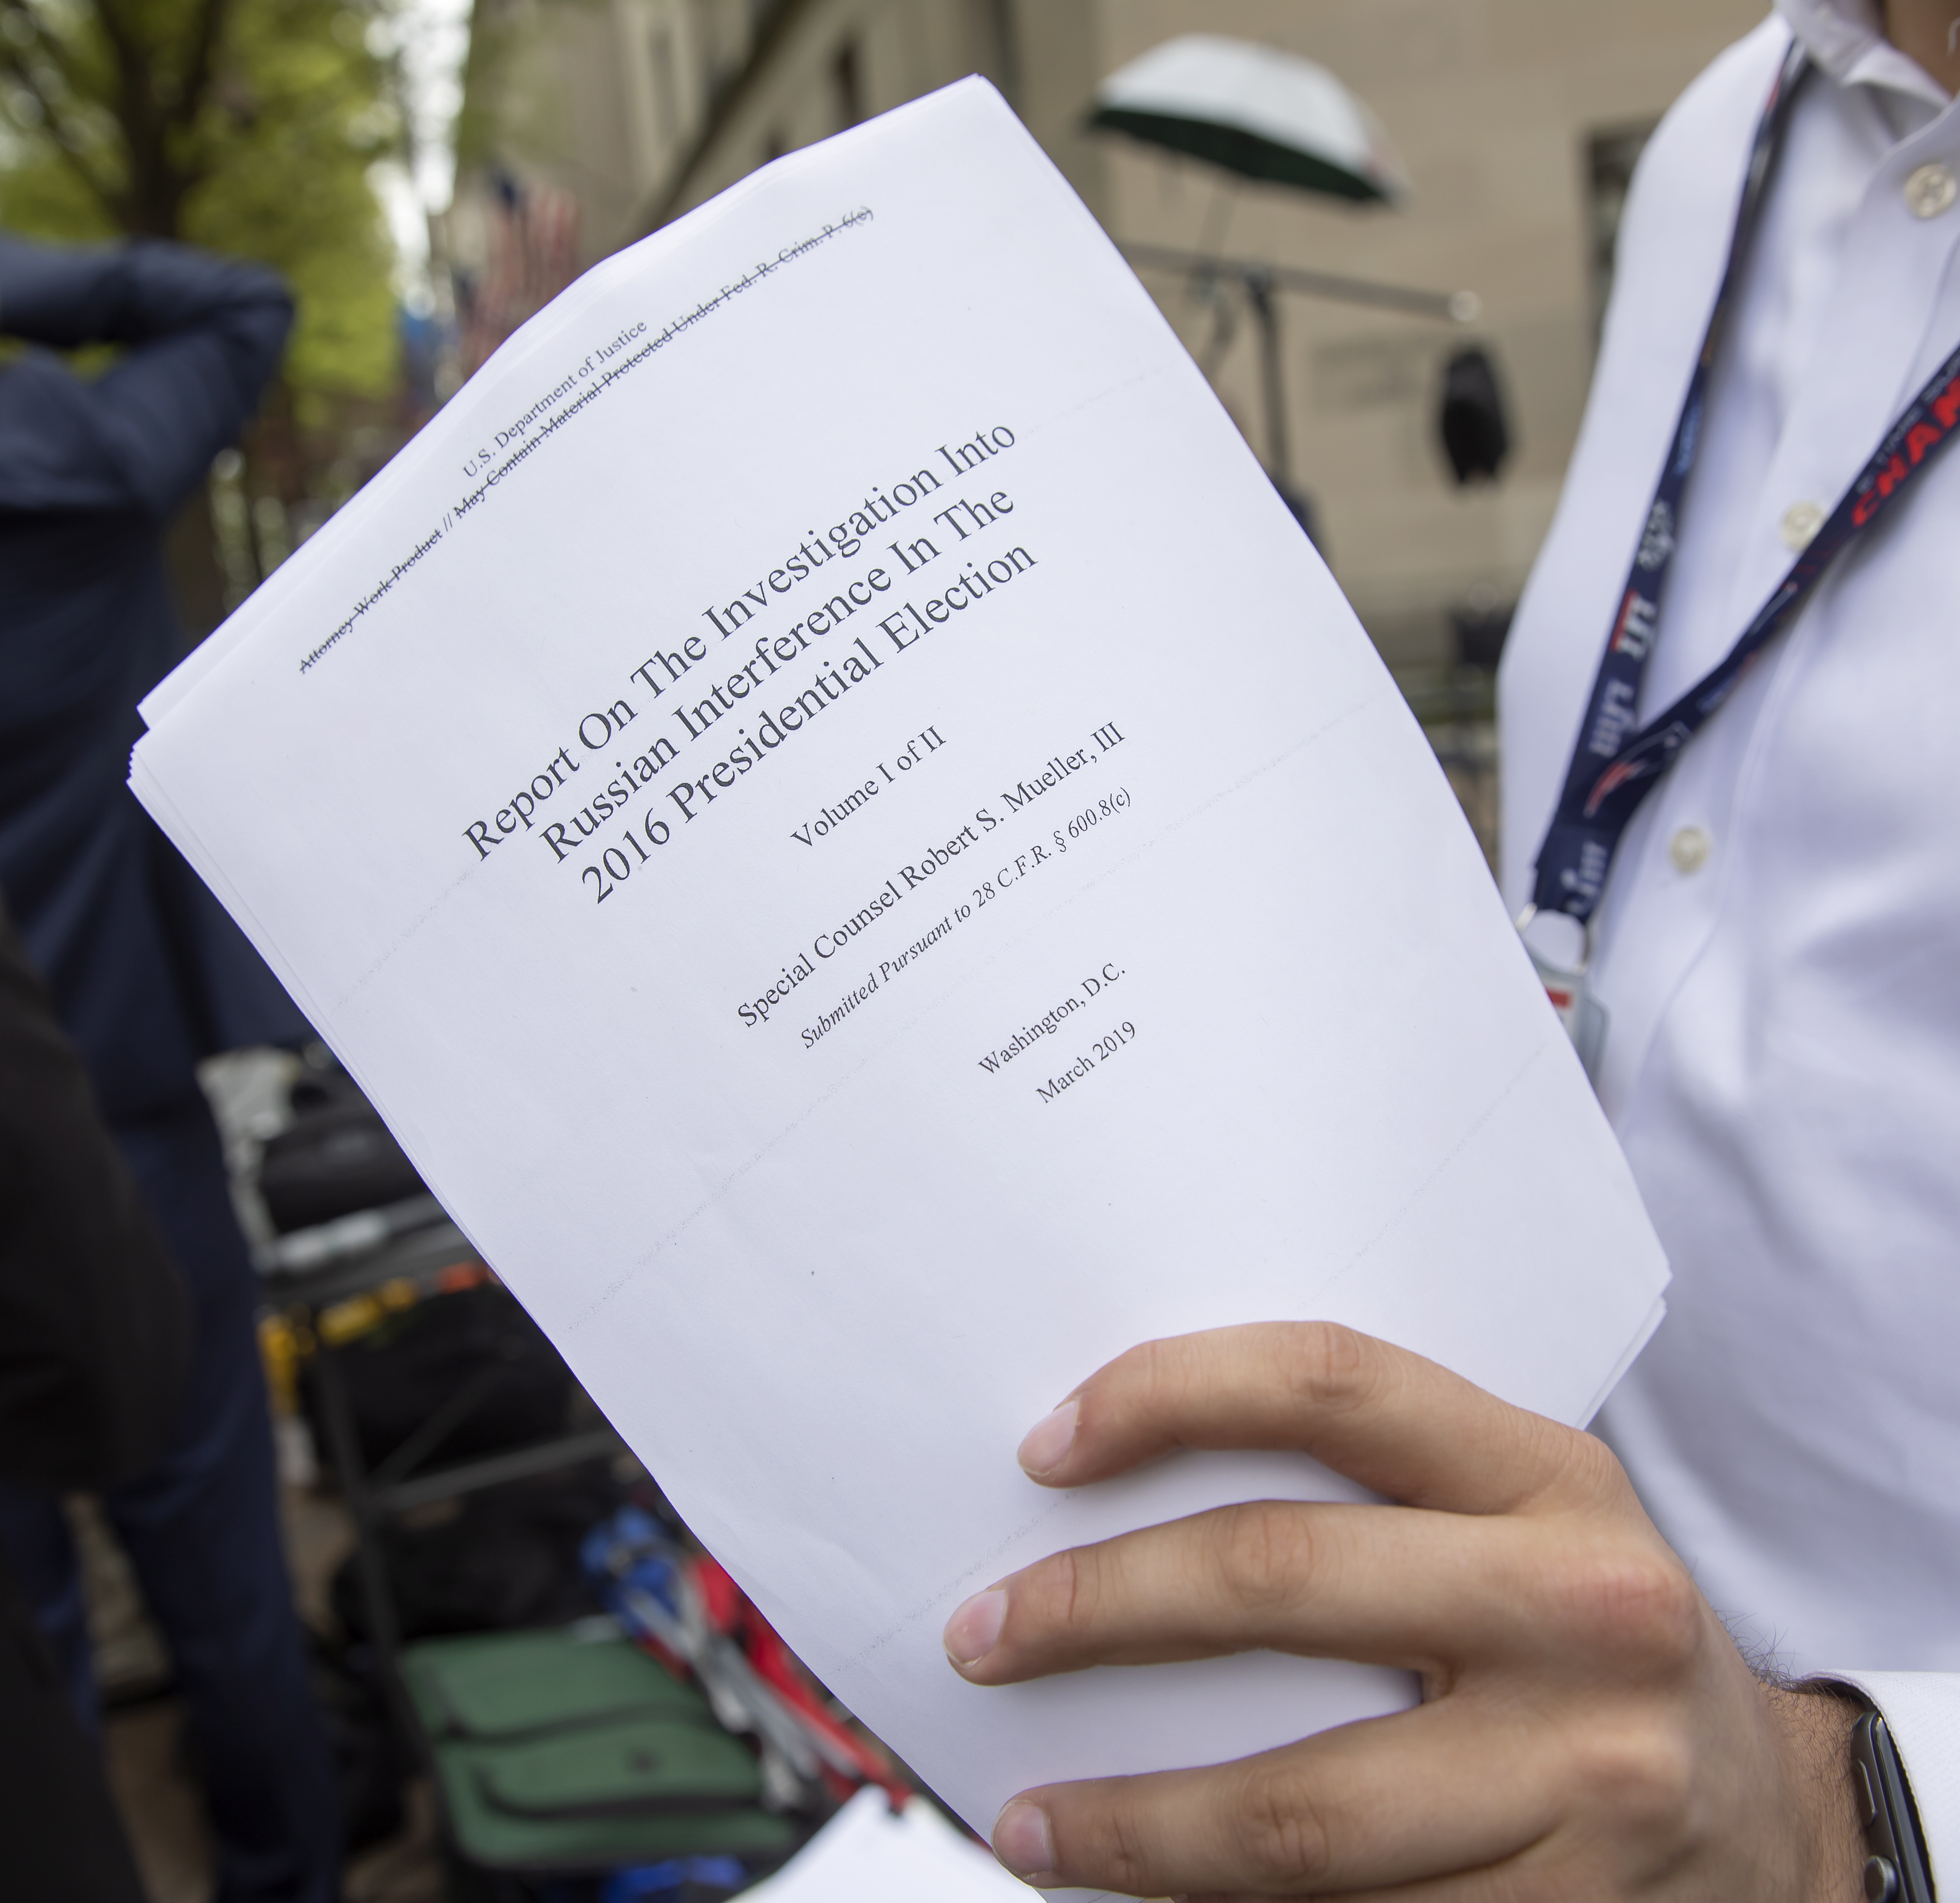 epa07514220 A reporter holds a printout of the redacted version of Special Counsel Robert Mueller's report on Russian interference in the 2016 election minutes after its release outside the US Department of Justice in Washington, DC, USA, 18 April 2019. According to news reports, Mueller and his team could not conclude that US President Donald J. Trump obstructed justice during the investigation.  EPA/ERIK S. LESSER